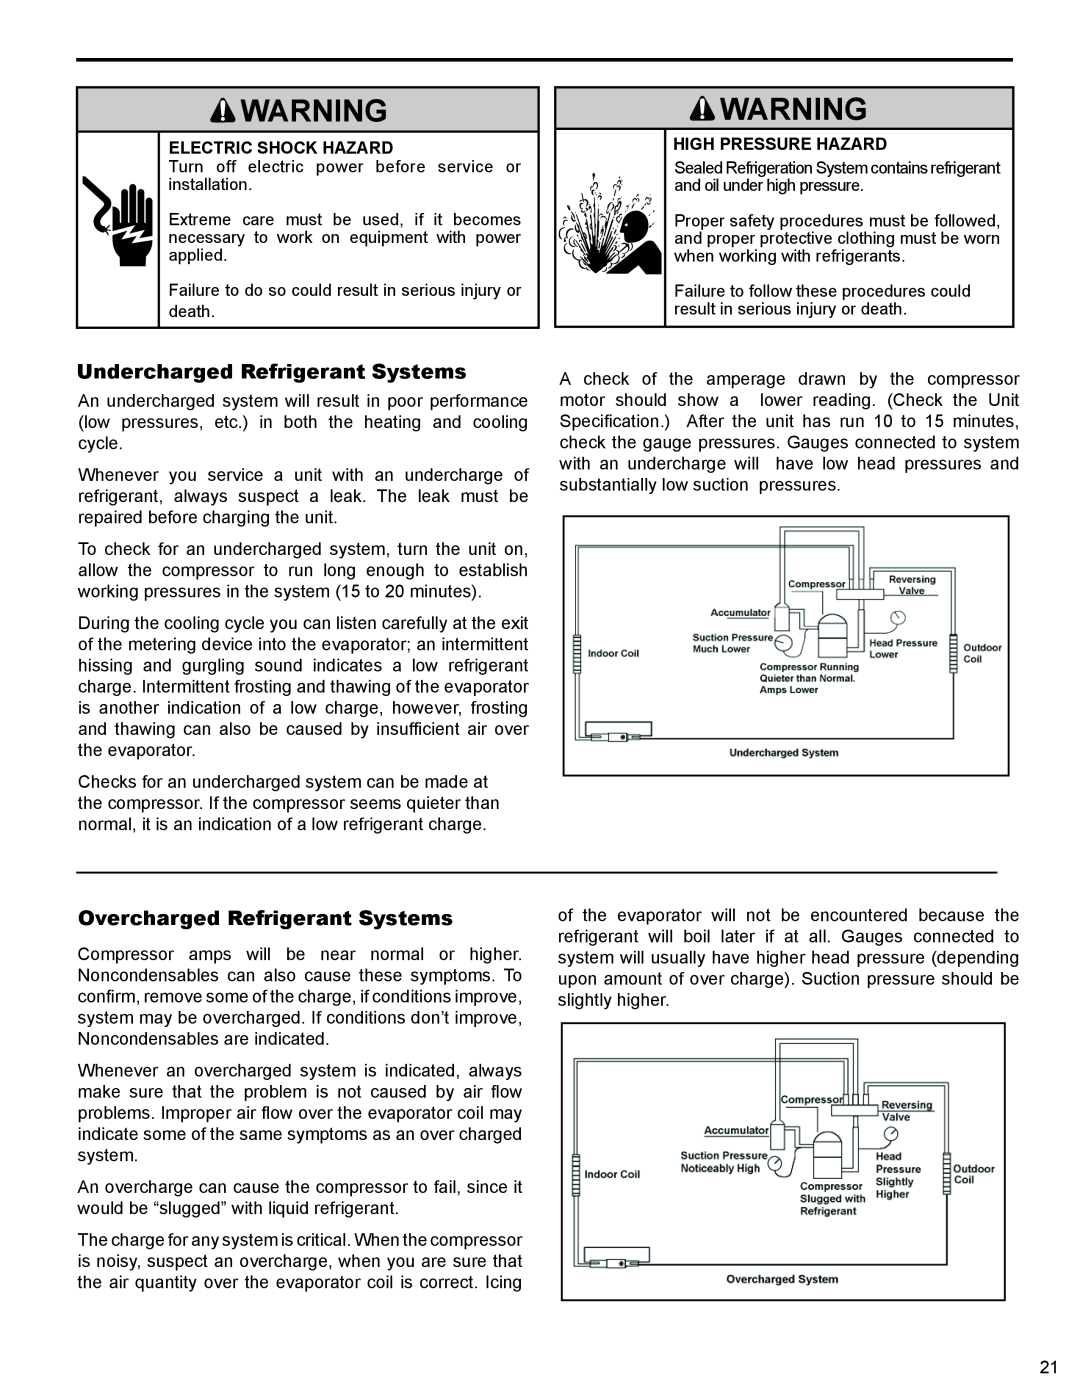 Friedrich 2009, 2008 service manual Undercharged Refrigerant Systems, Overcharged Refrigerant Systems 